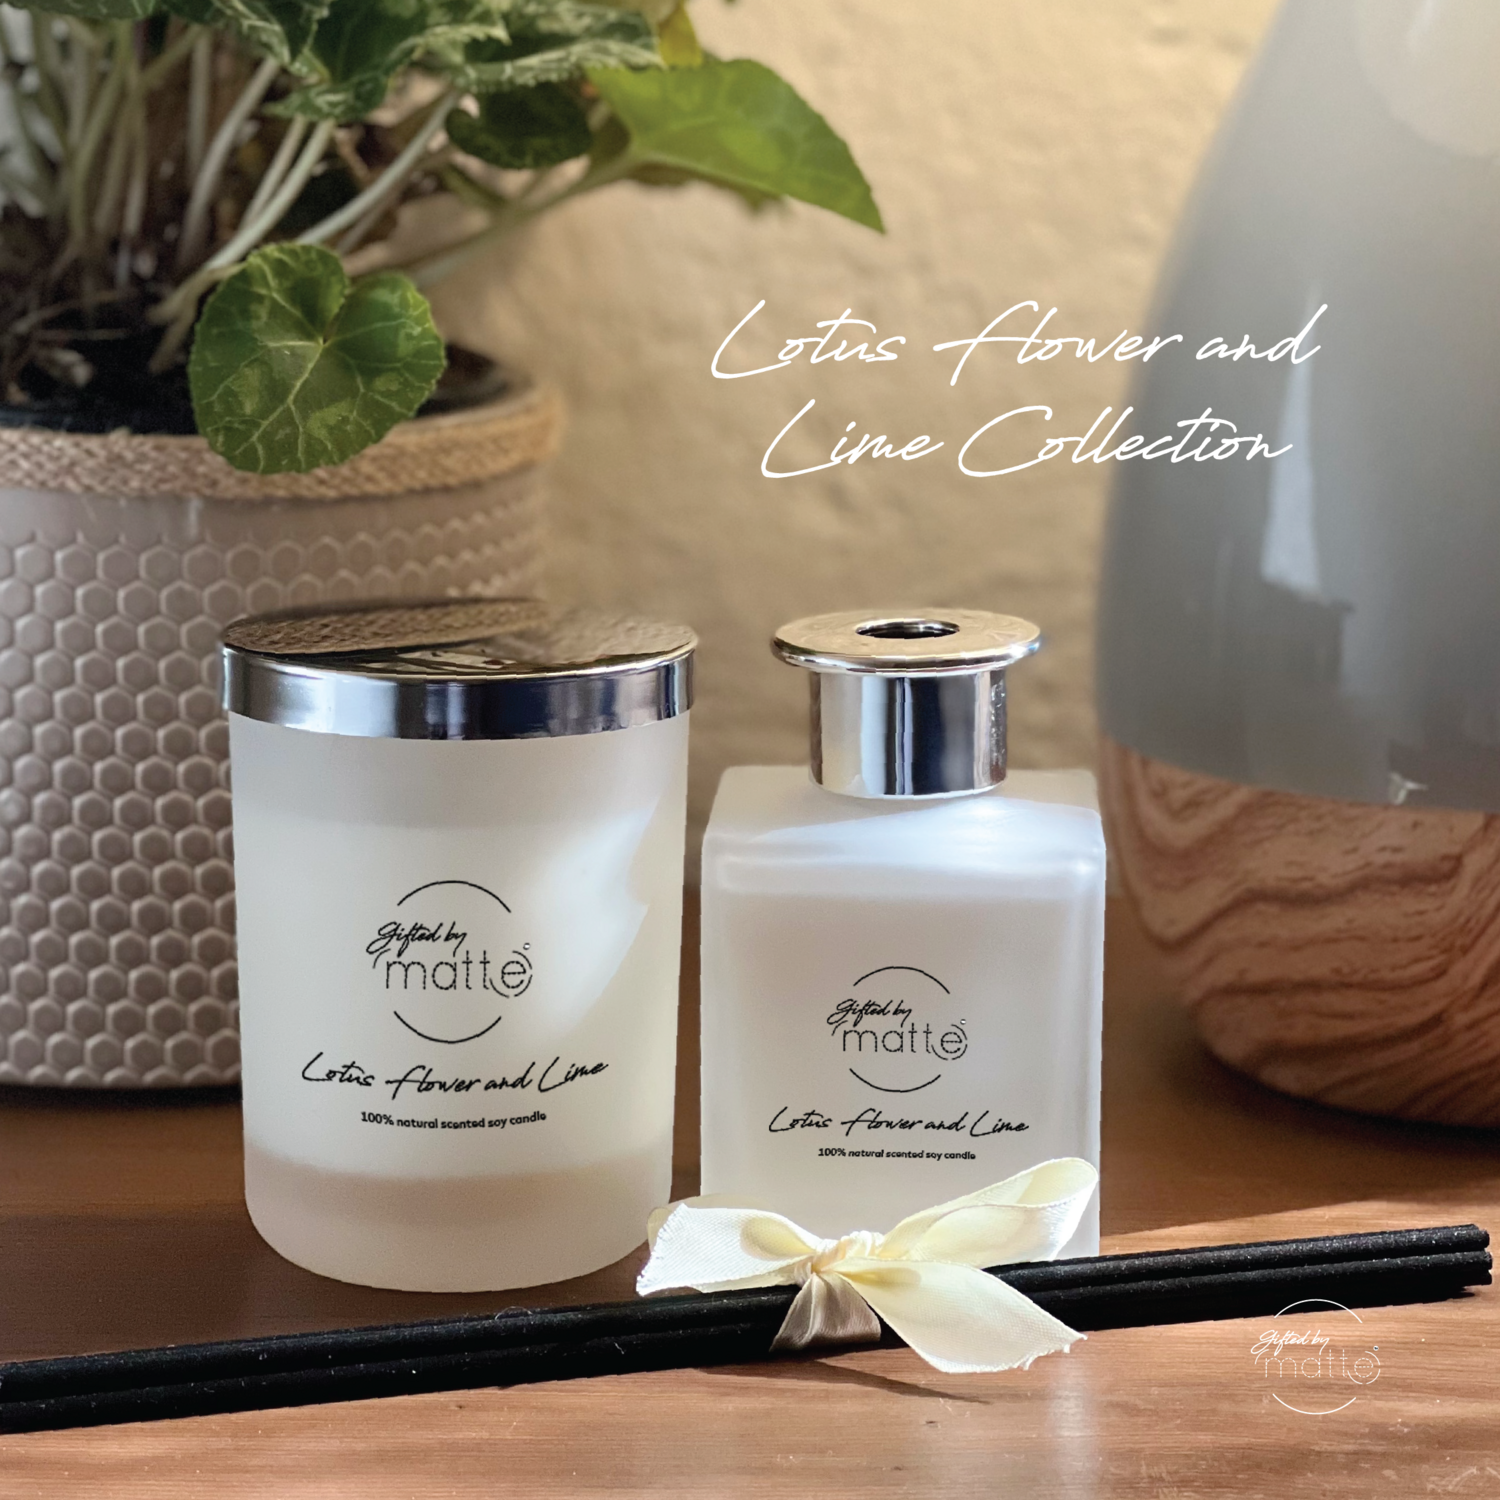 Lotus Flower and Lime Candle & Diffuser Collection